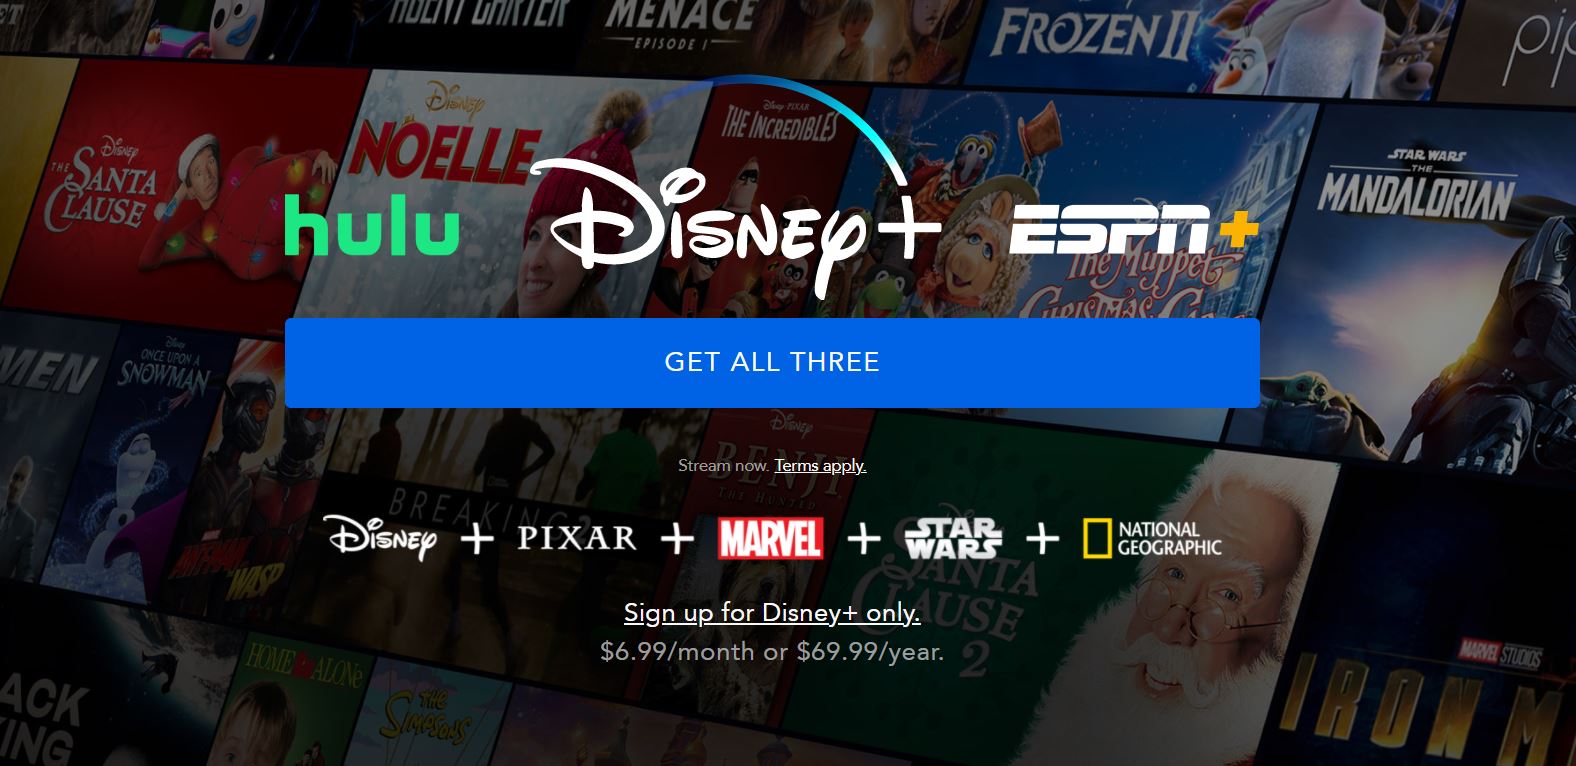 Deal: Get Hulu for free when you sign up for ESPN Plus and Disney Plus